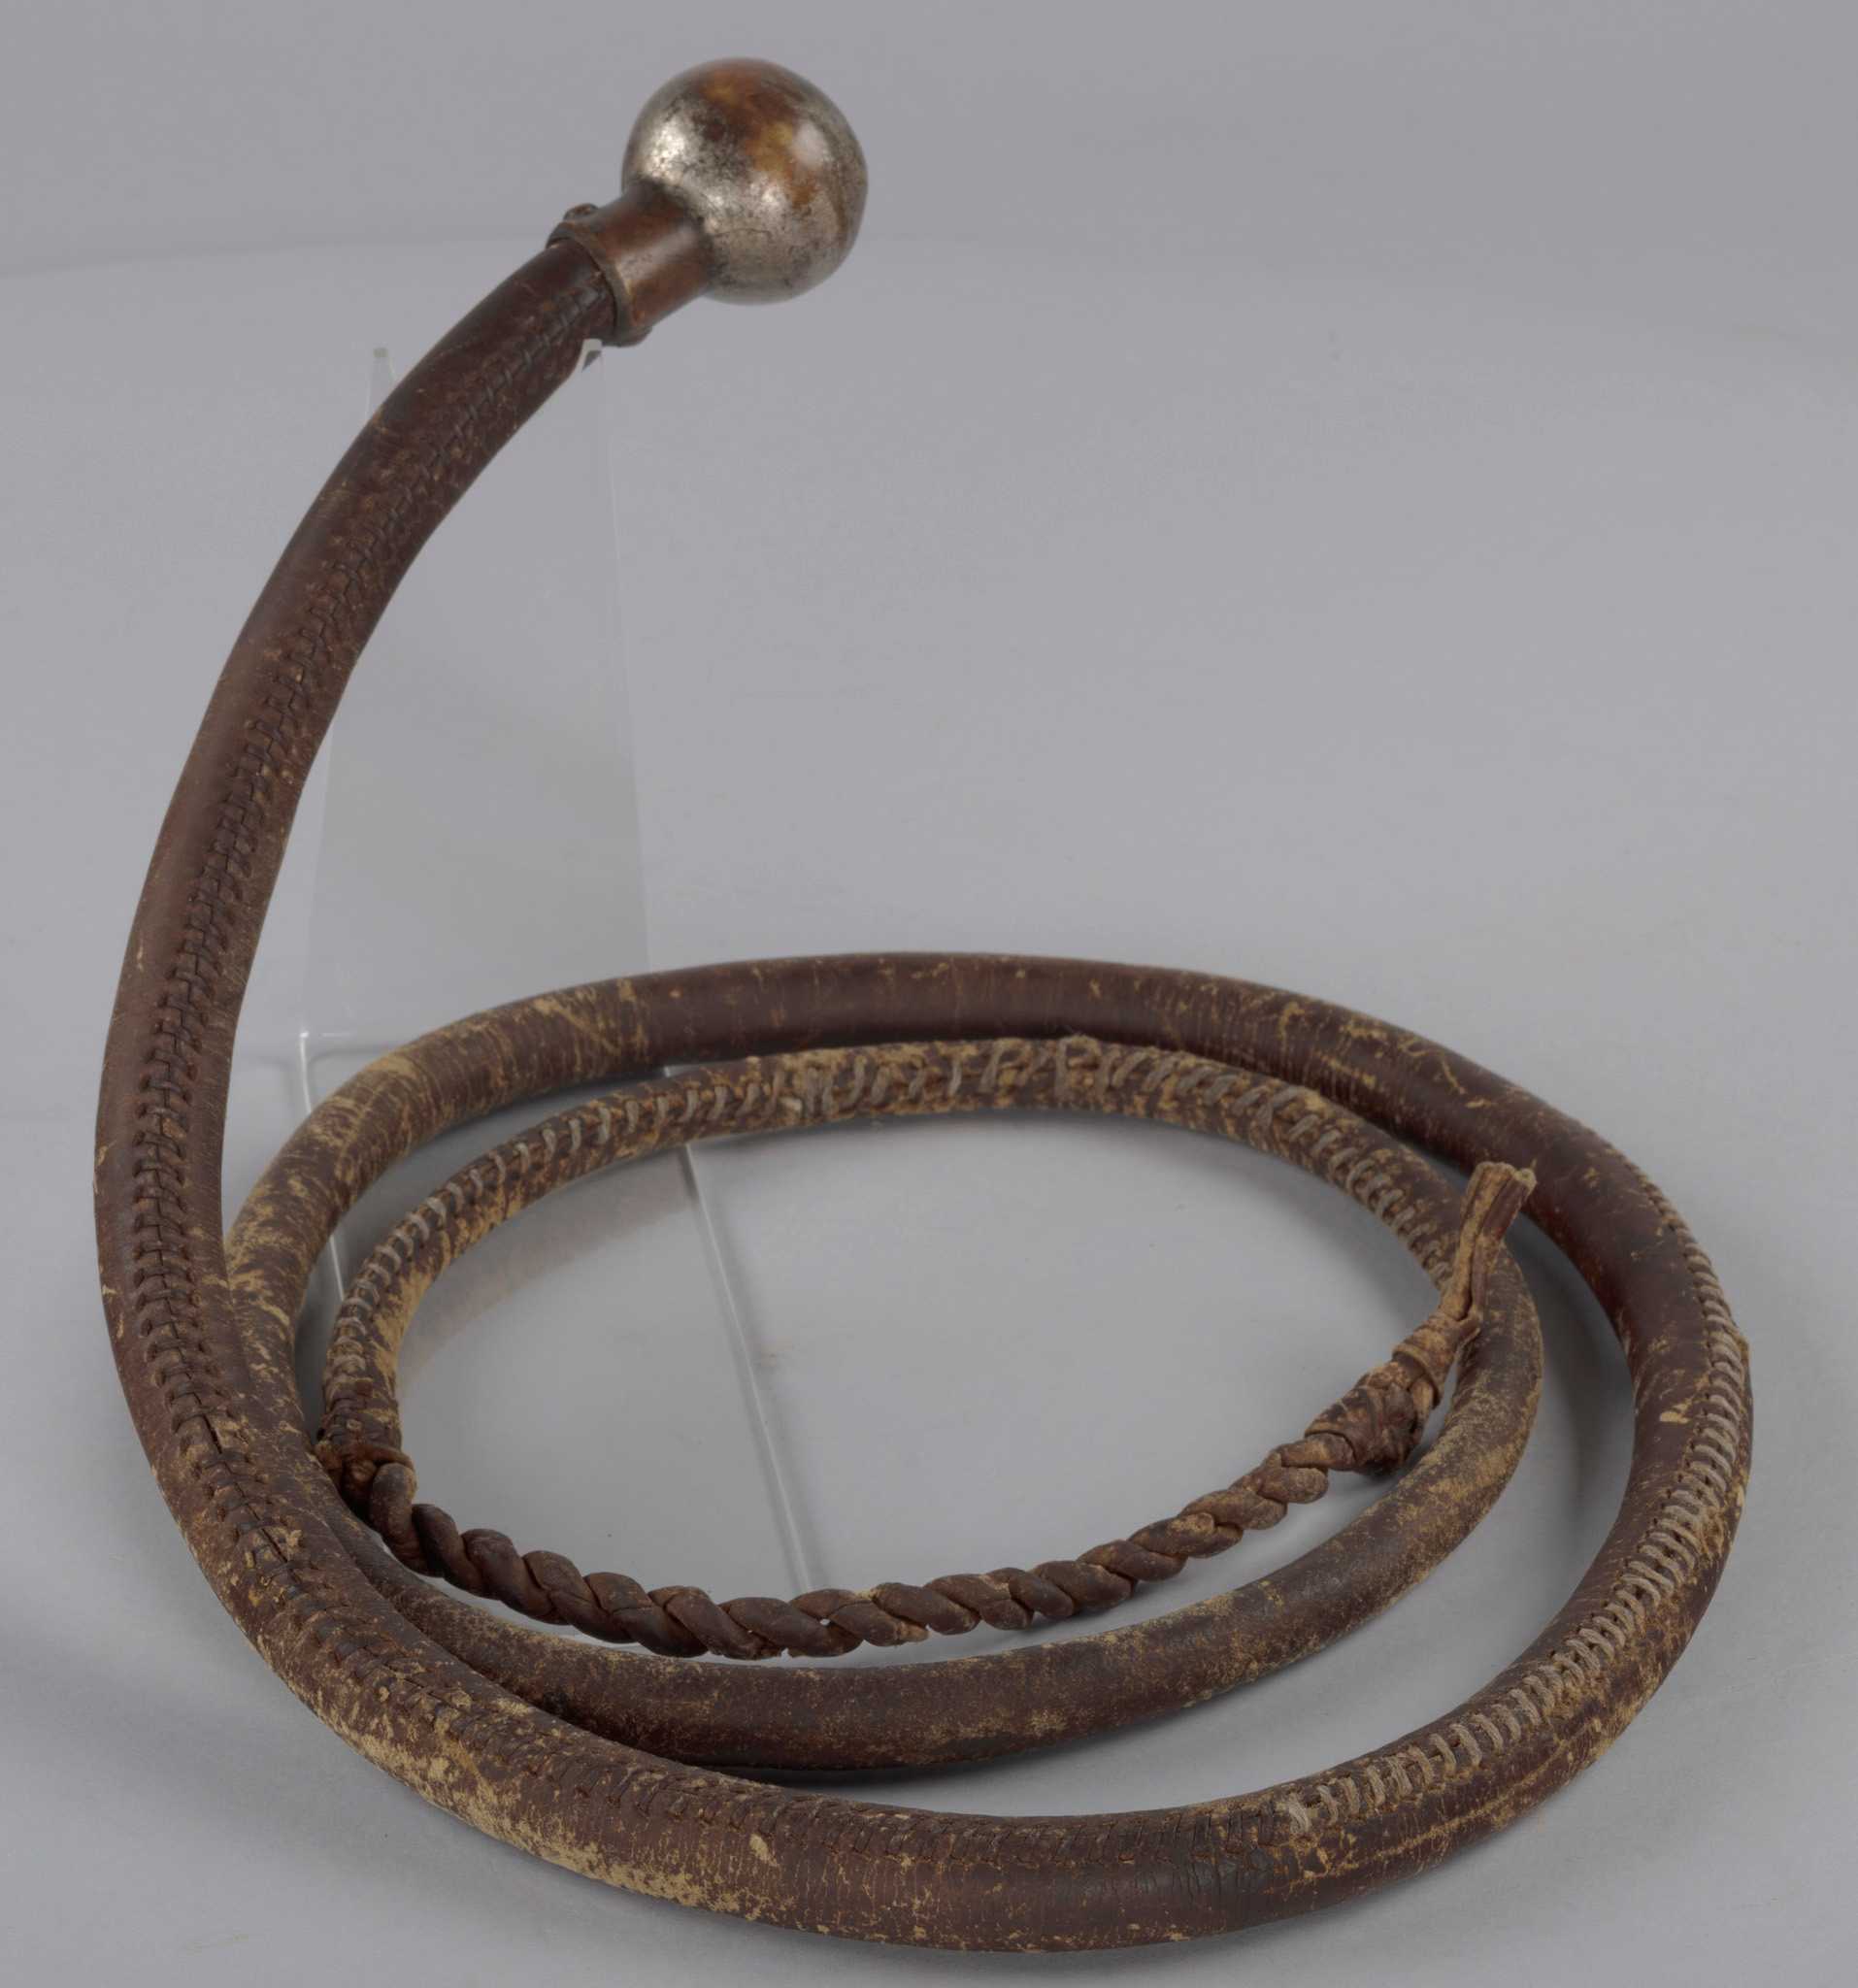 A long, single-tailed snake whip made of coiled leather strands inside a smooth, hand-stitched leather shot bag running three quarters of the length. The fall consists of two tightly twisted strands that terminate in a hard knot. The metal knob handle is attached to the leather by two nails, allowing the whip to be coiled up for easy carrying.